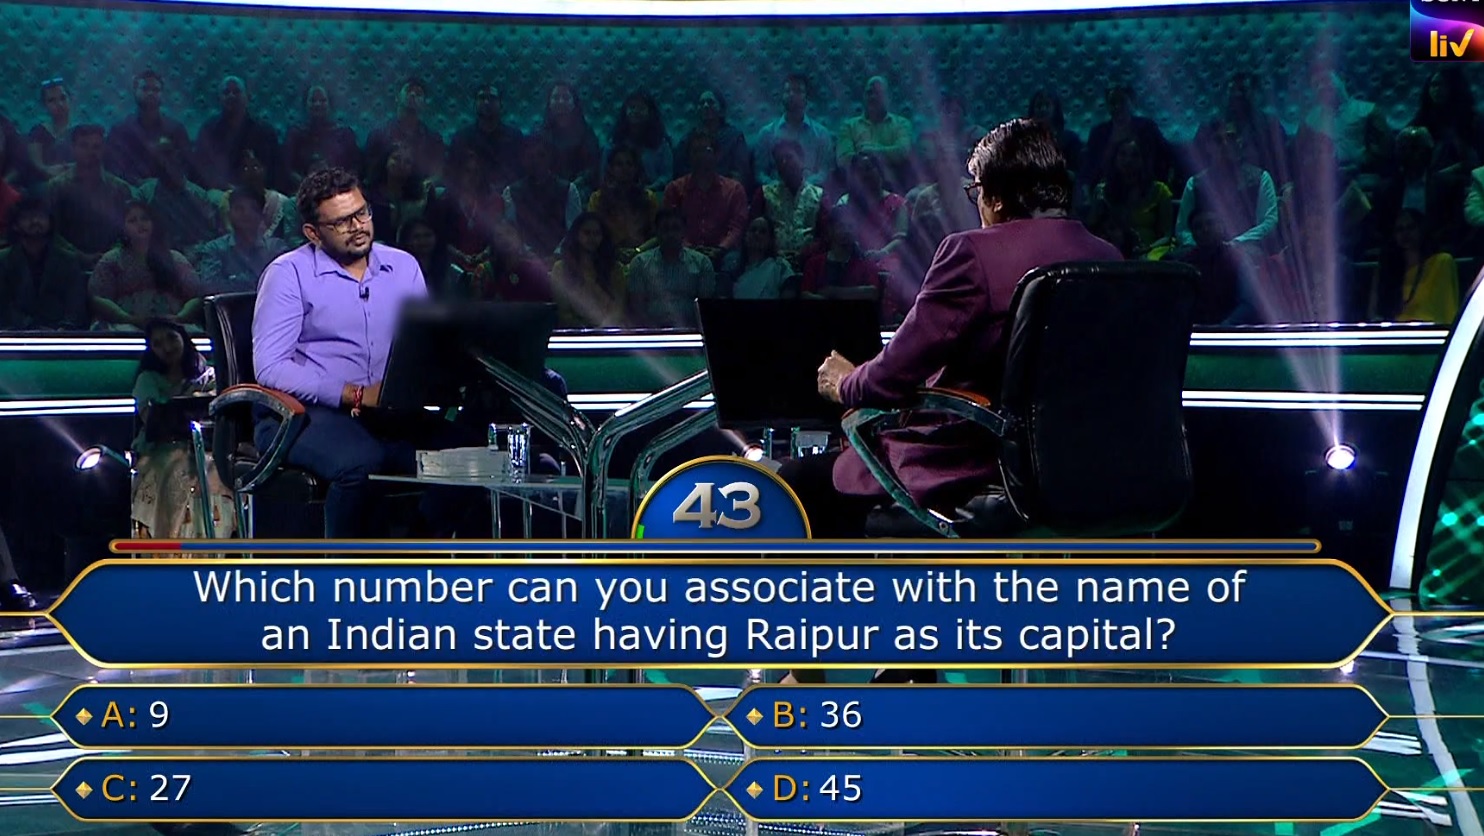 Ques : Which number can you associate with the name of an Indian state having Raipur as its capital?